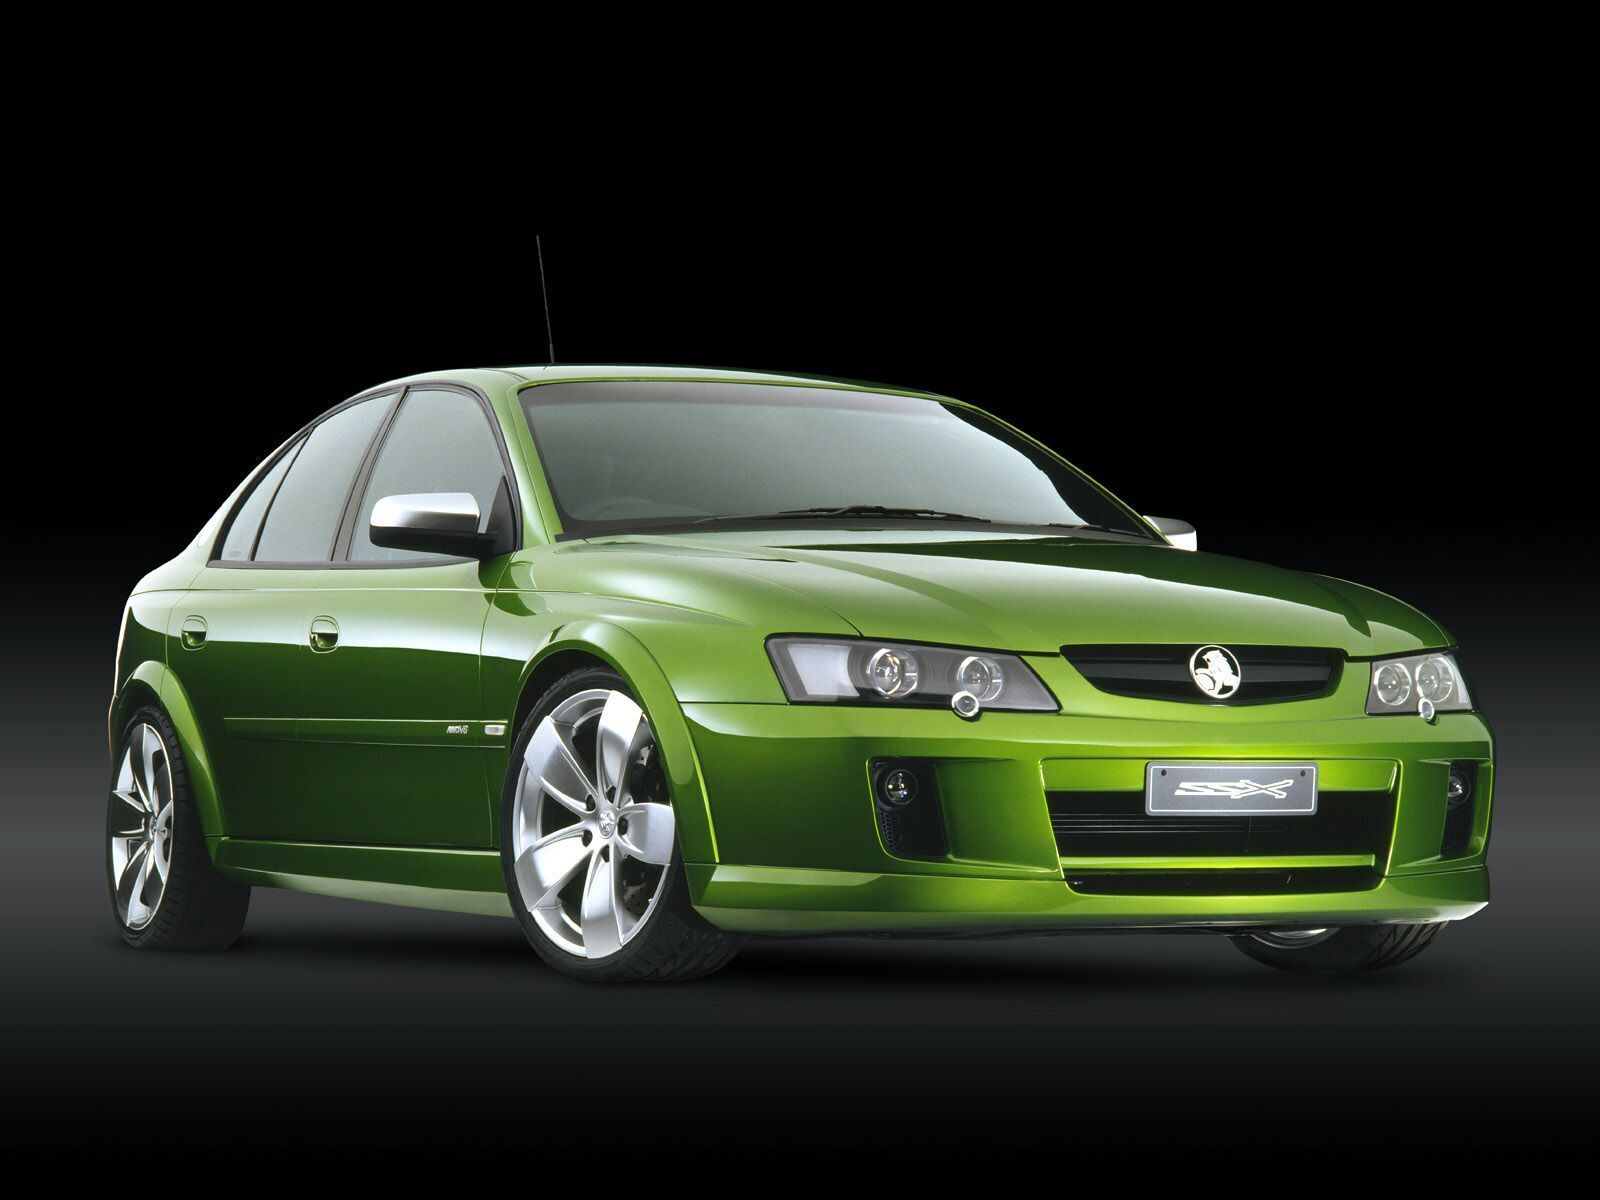 Holden Commodore Wallpaper Free Holden Commodore Background